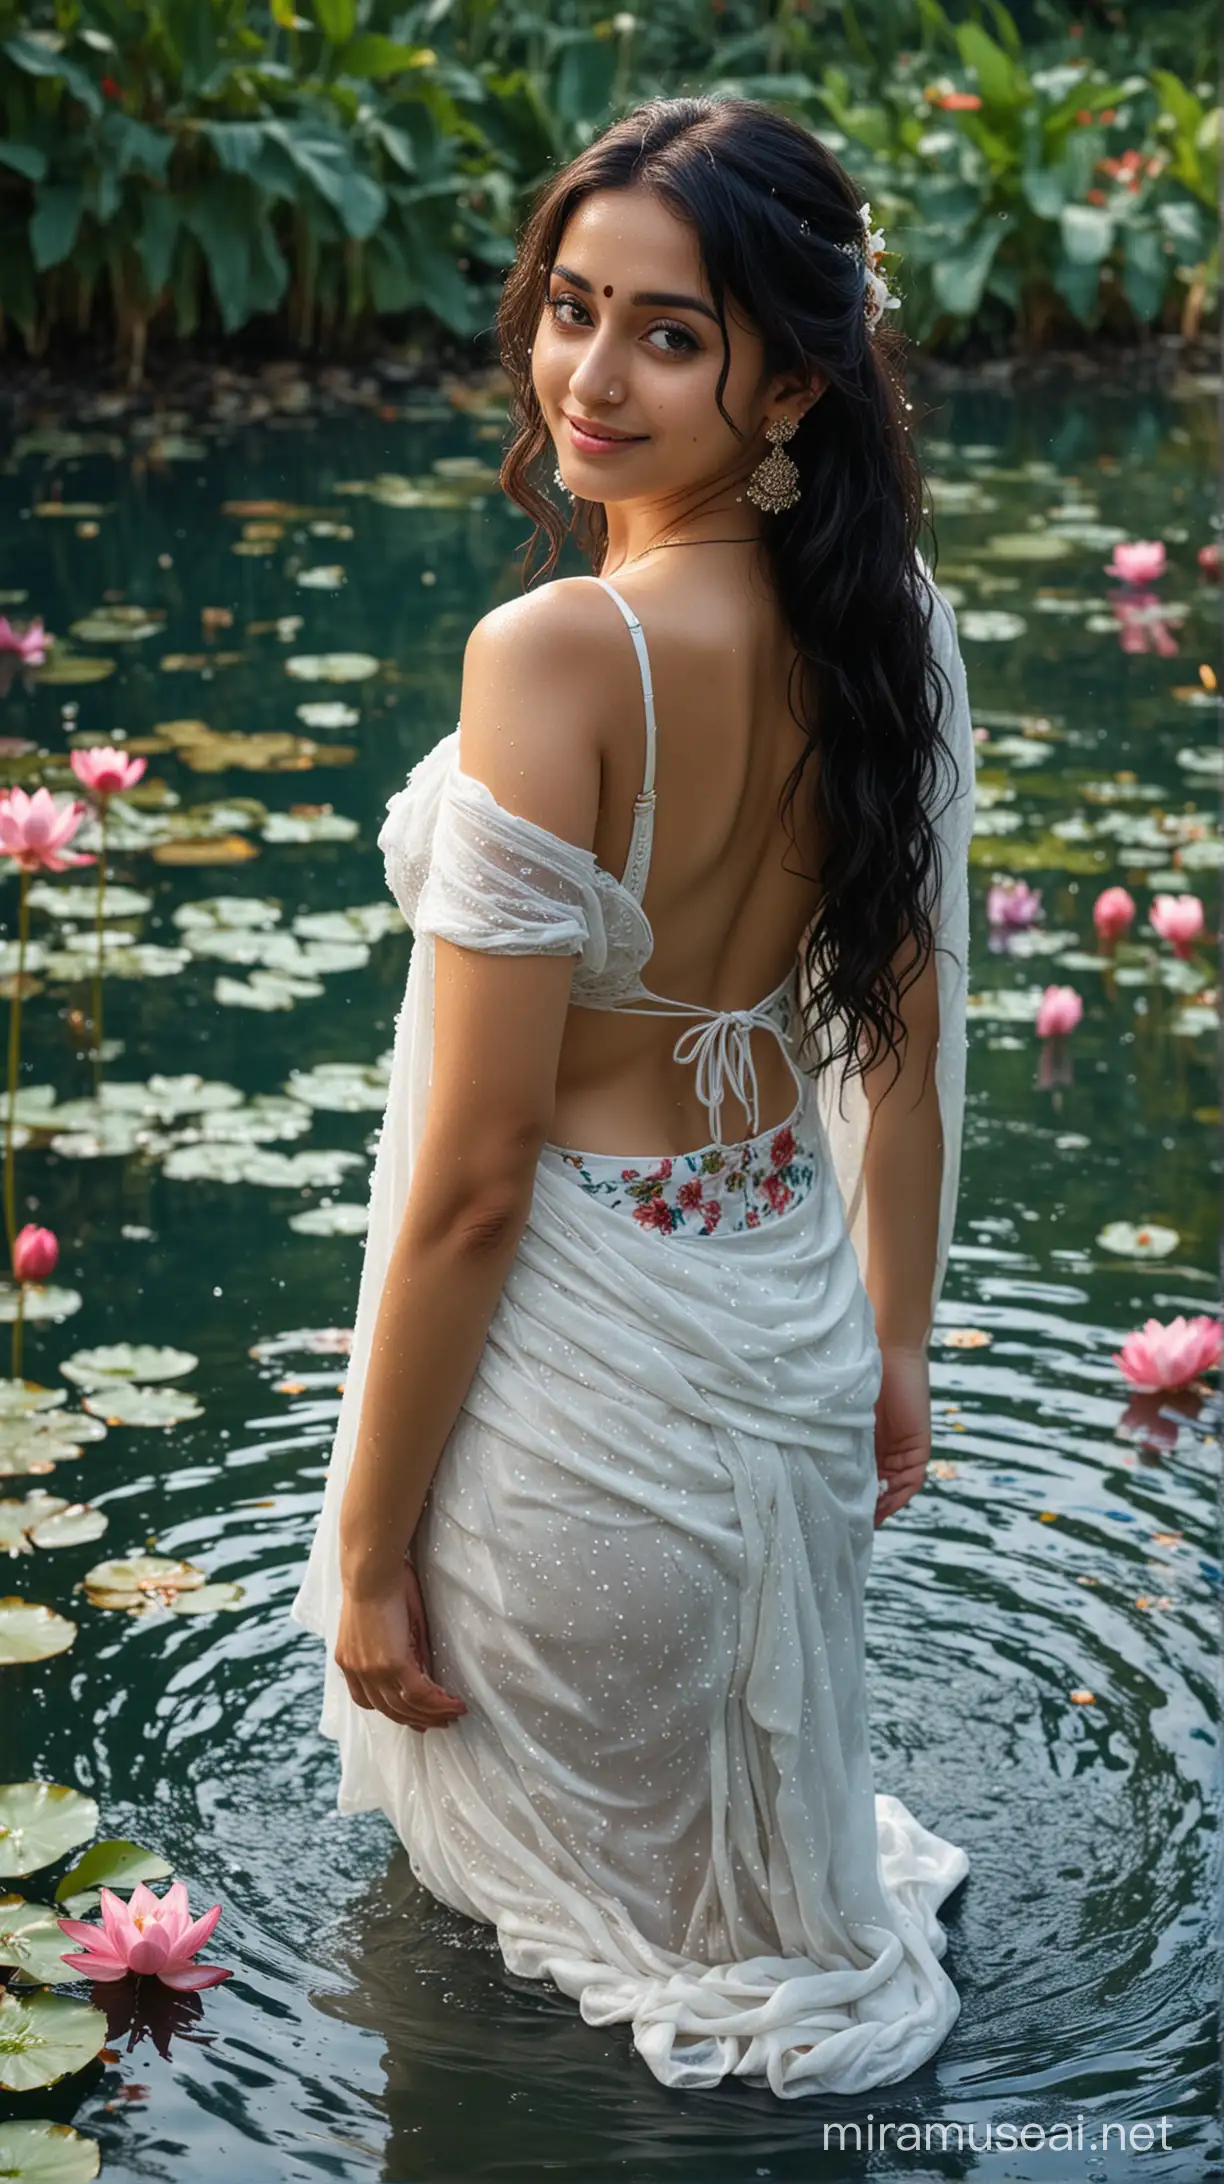 Beautiful European Indian Bride Bathing in Pond with Vibrant Lotus Flowers